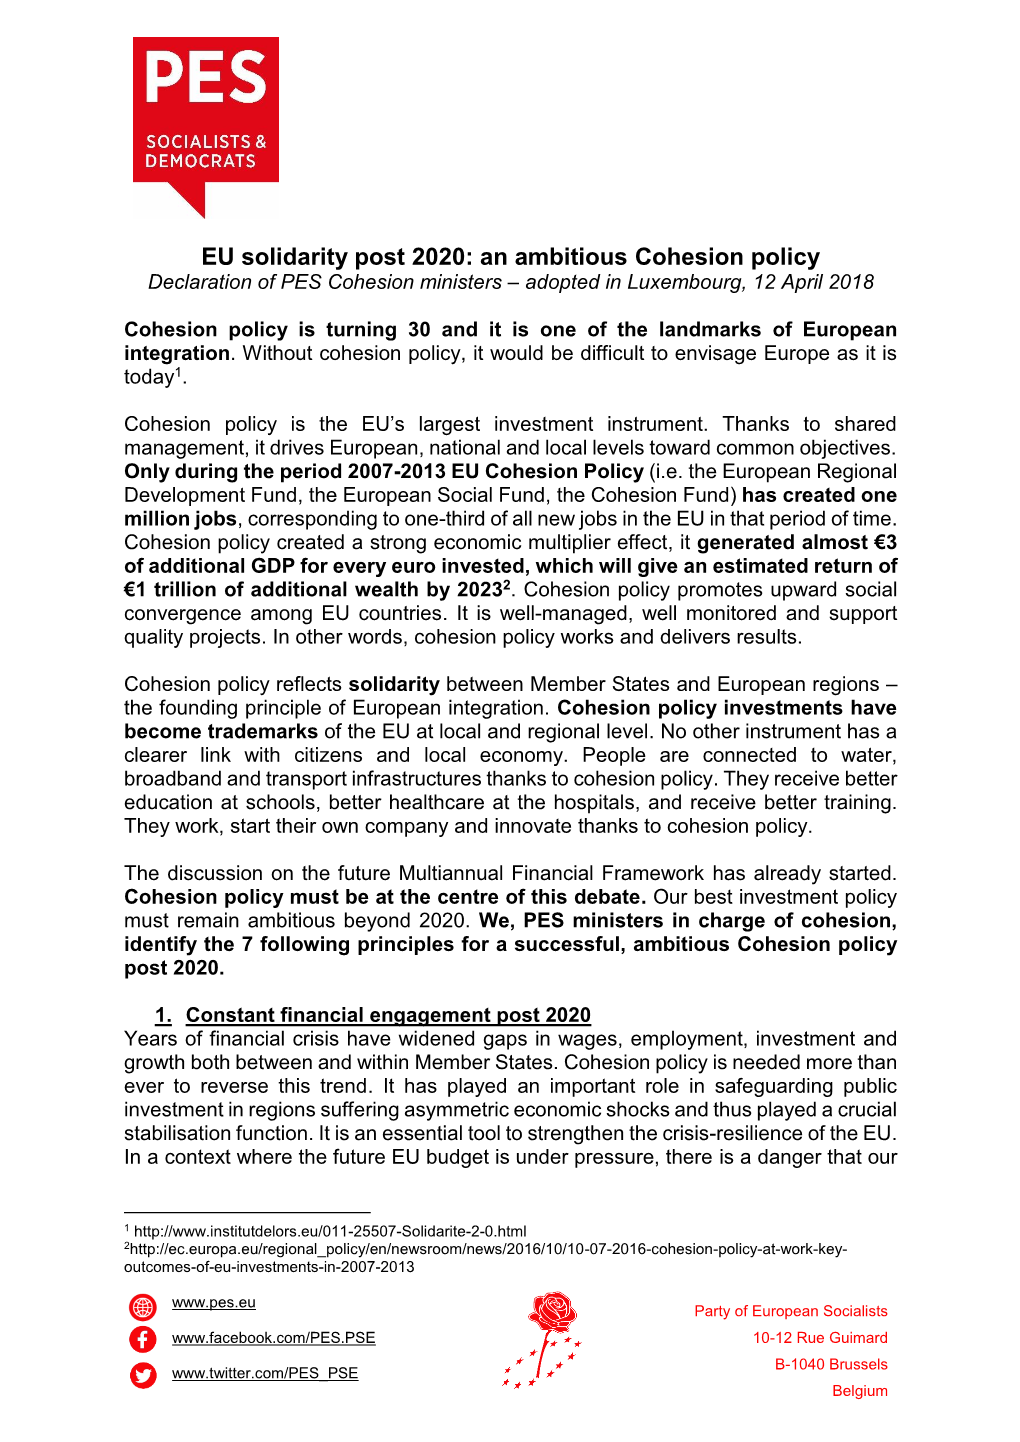 An Ambitious Cohesion Policy Declaration of PES Cohesion Ministers – Adopted in Luxembourg, 12 April 2018